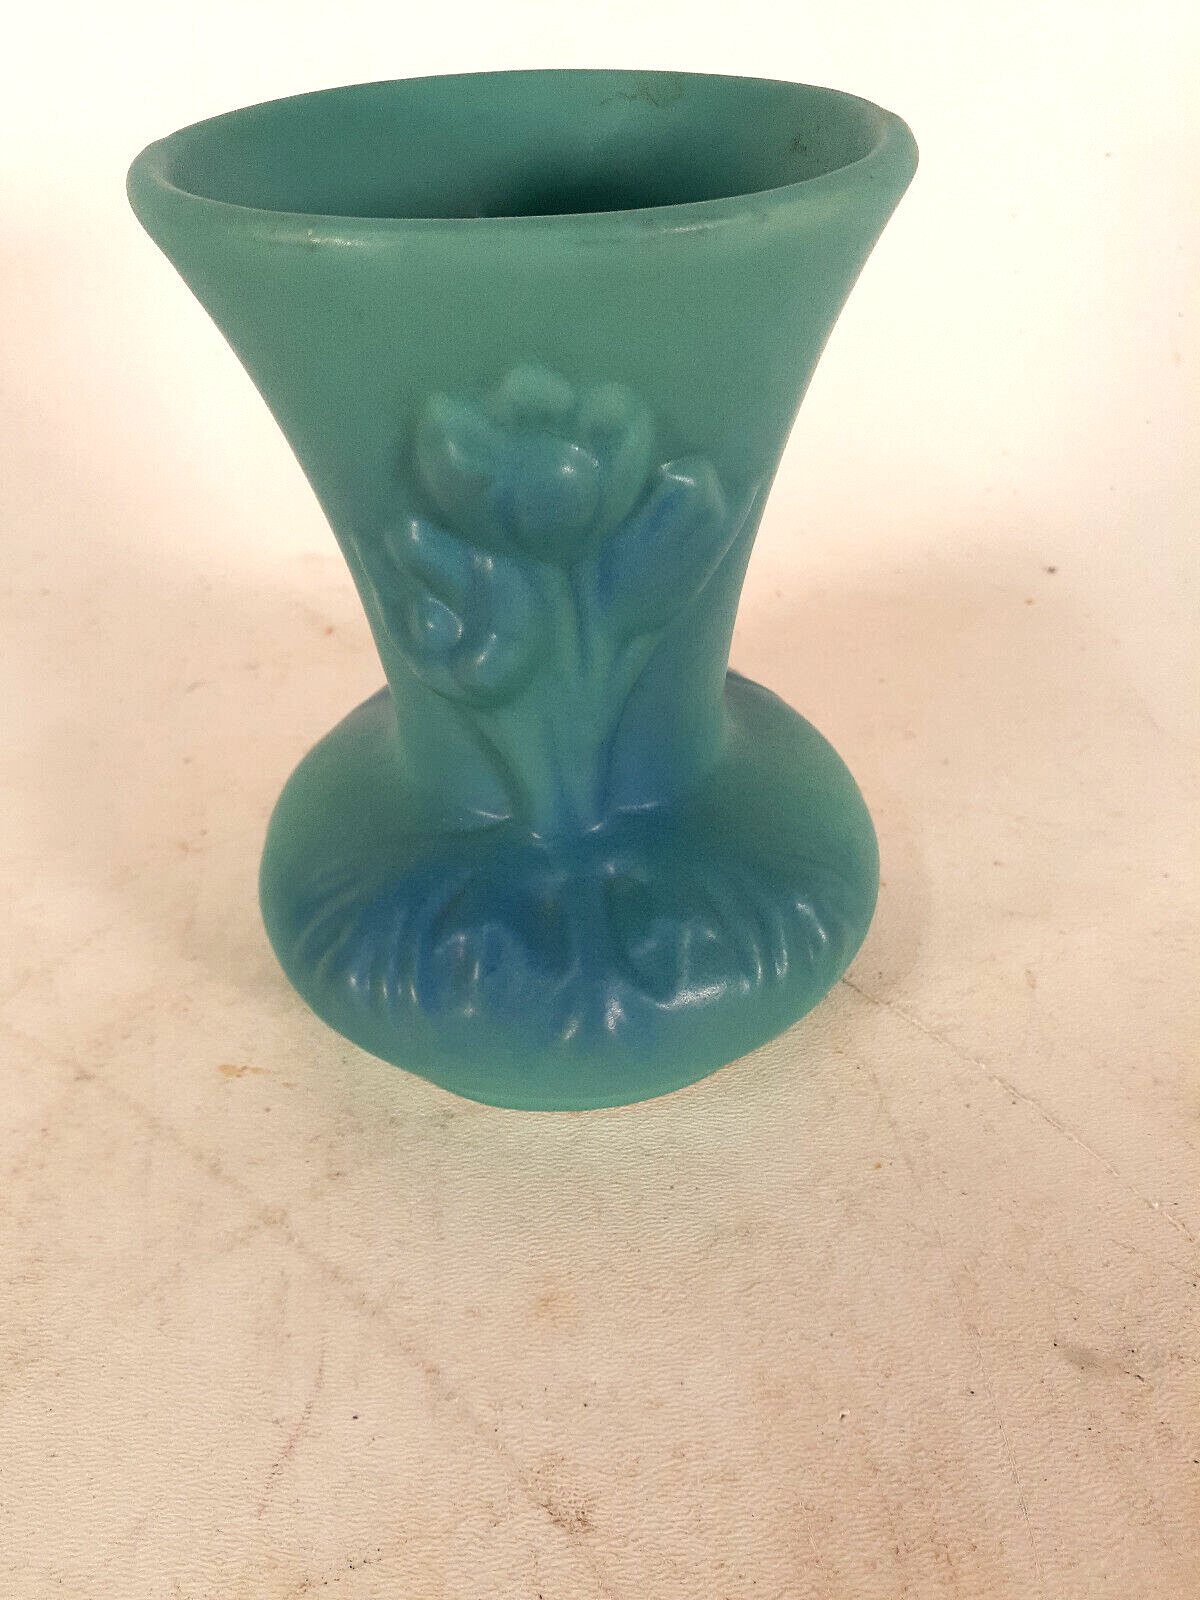 Primary image for Van Briggle Art Pottery Turquoise Floral Tulip Vase, 5" tall